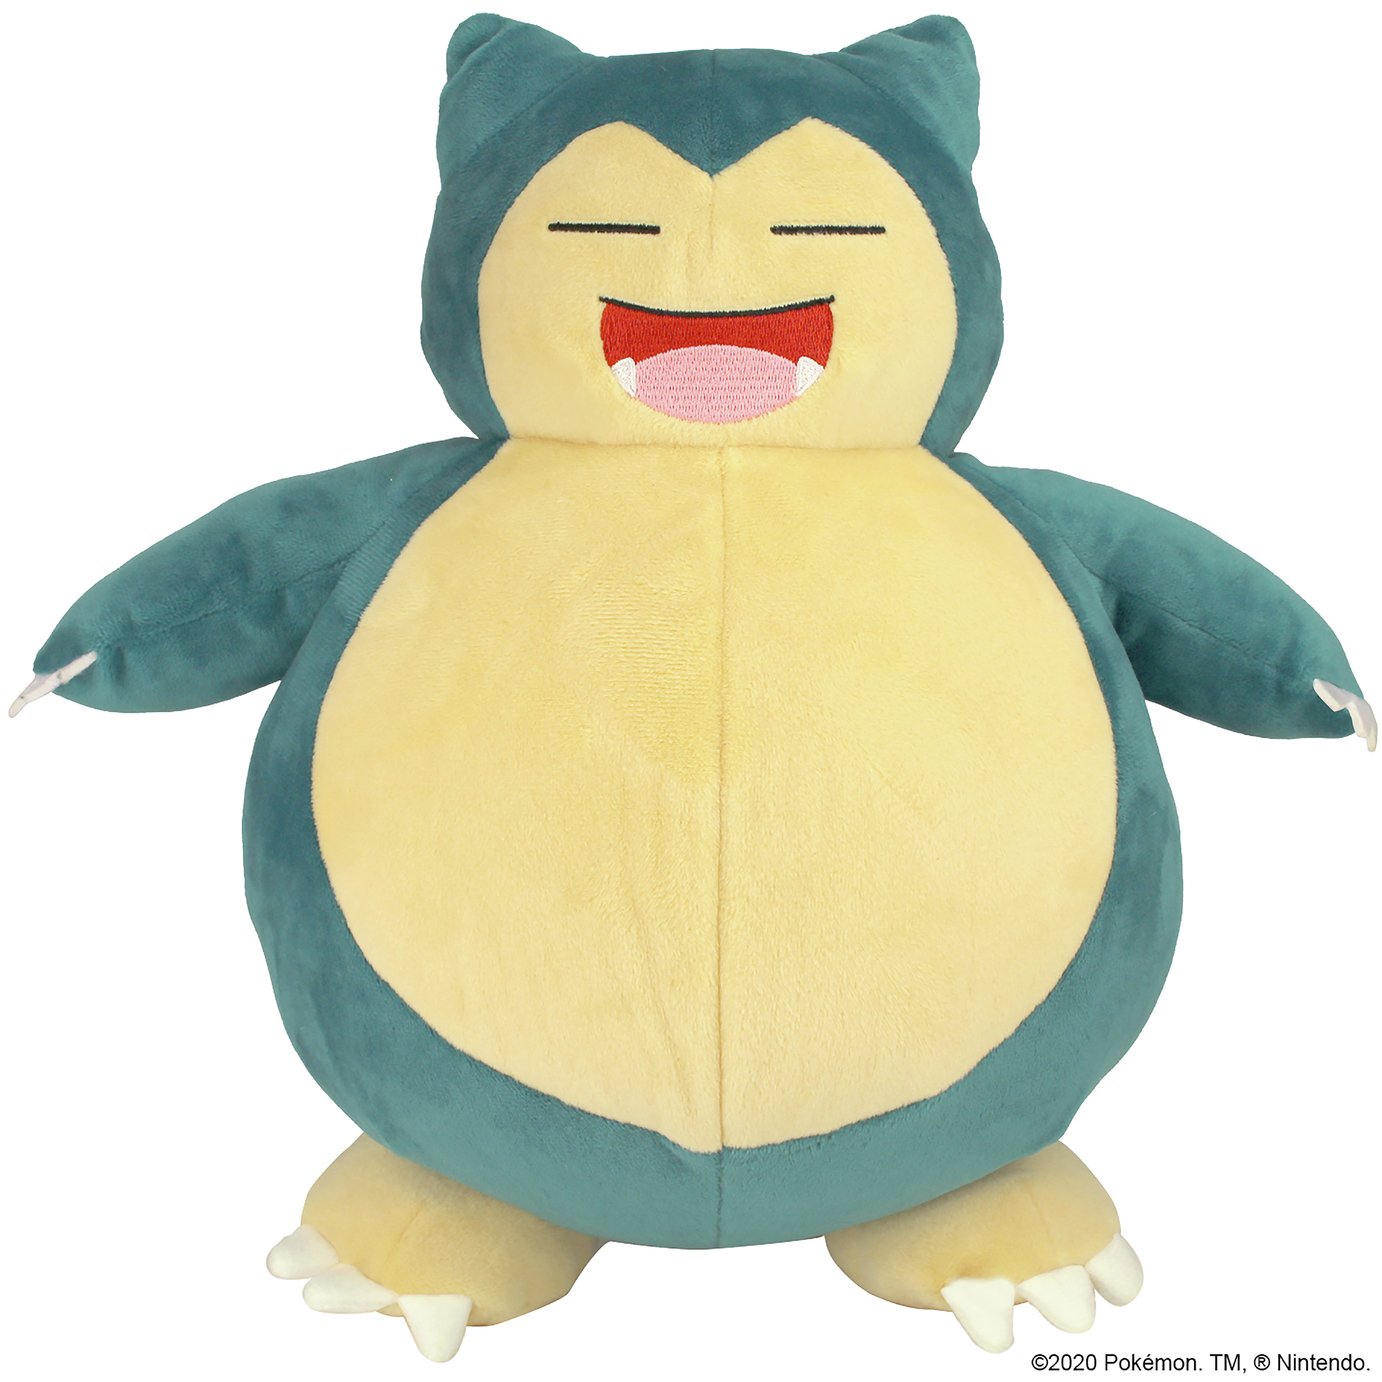 Pokemon Snooze Action Snorlax Figure Review